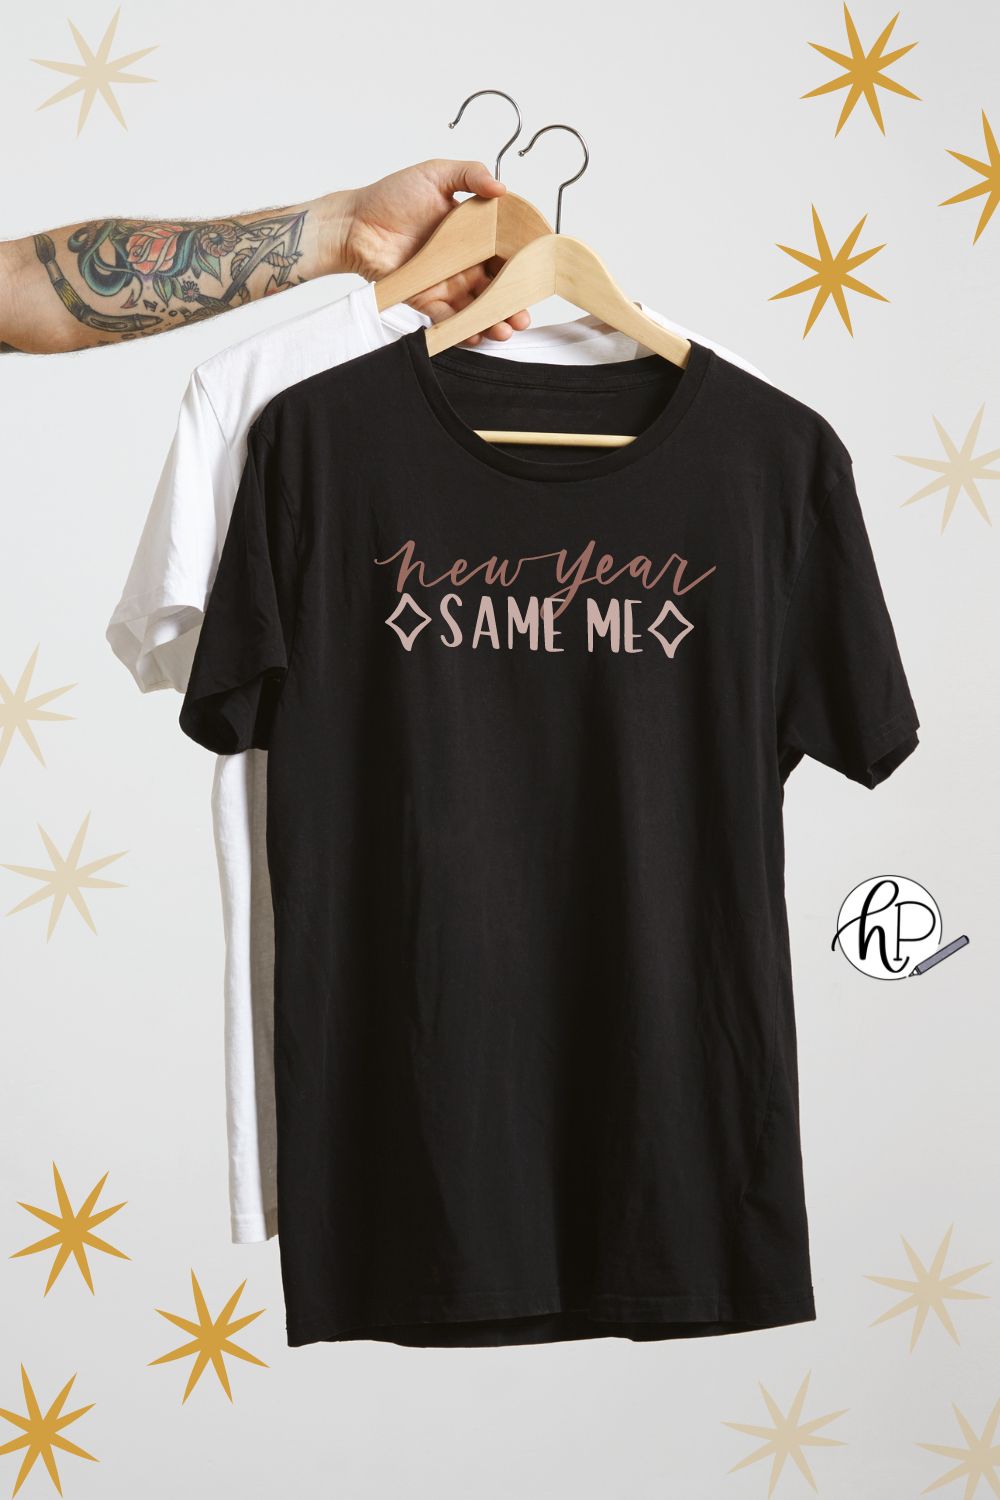 new year same me svg design on black t-shirt being held by hand on hanger with stars in background